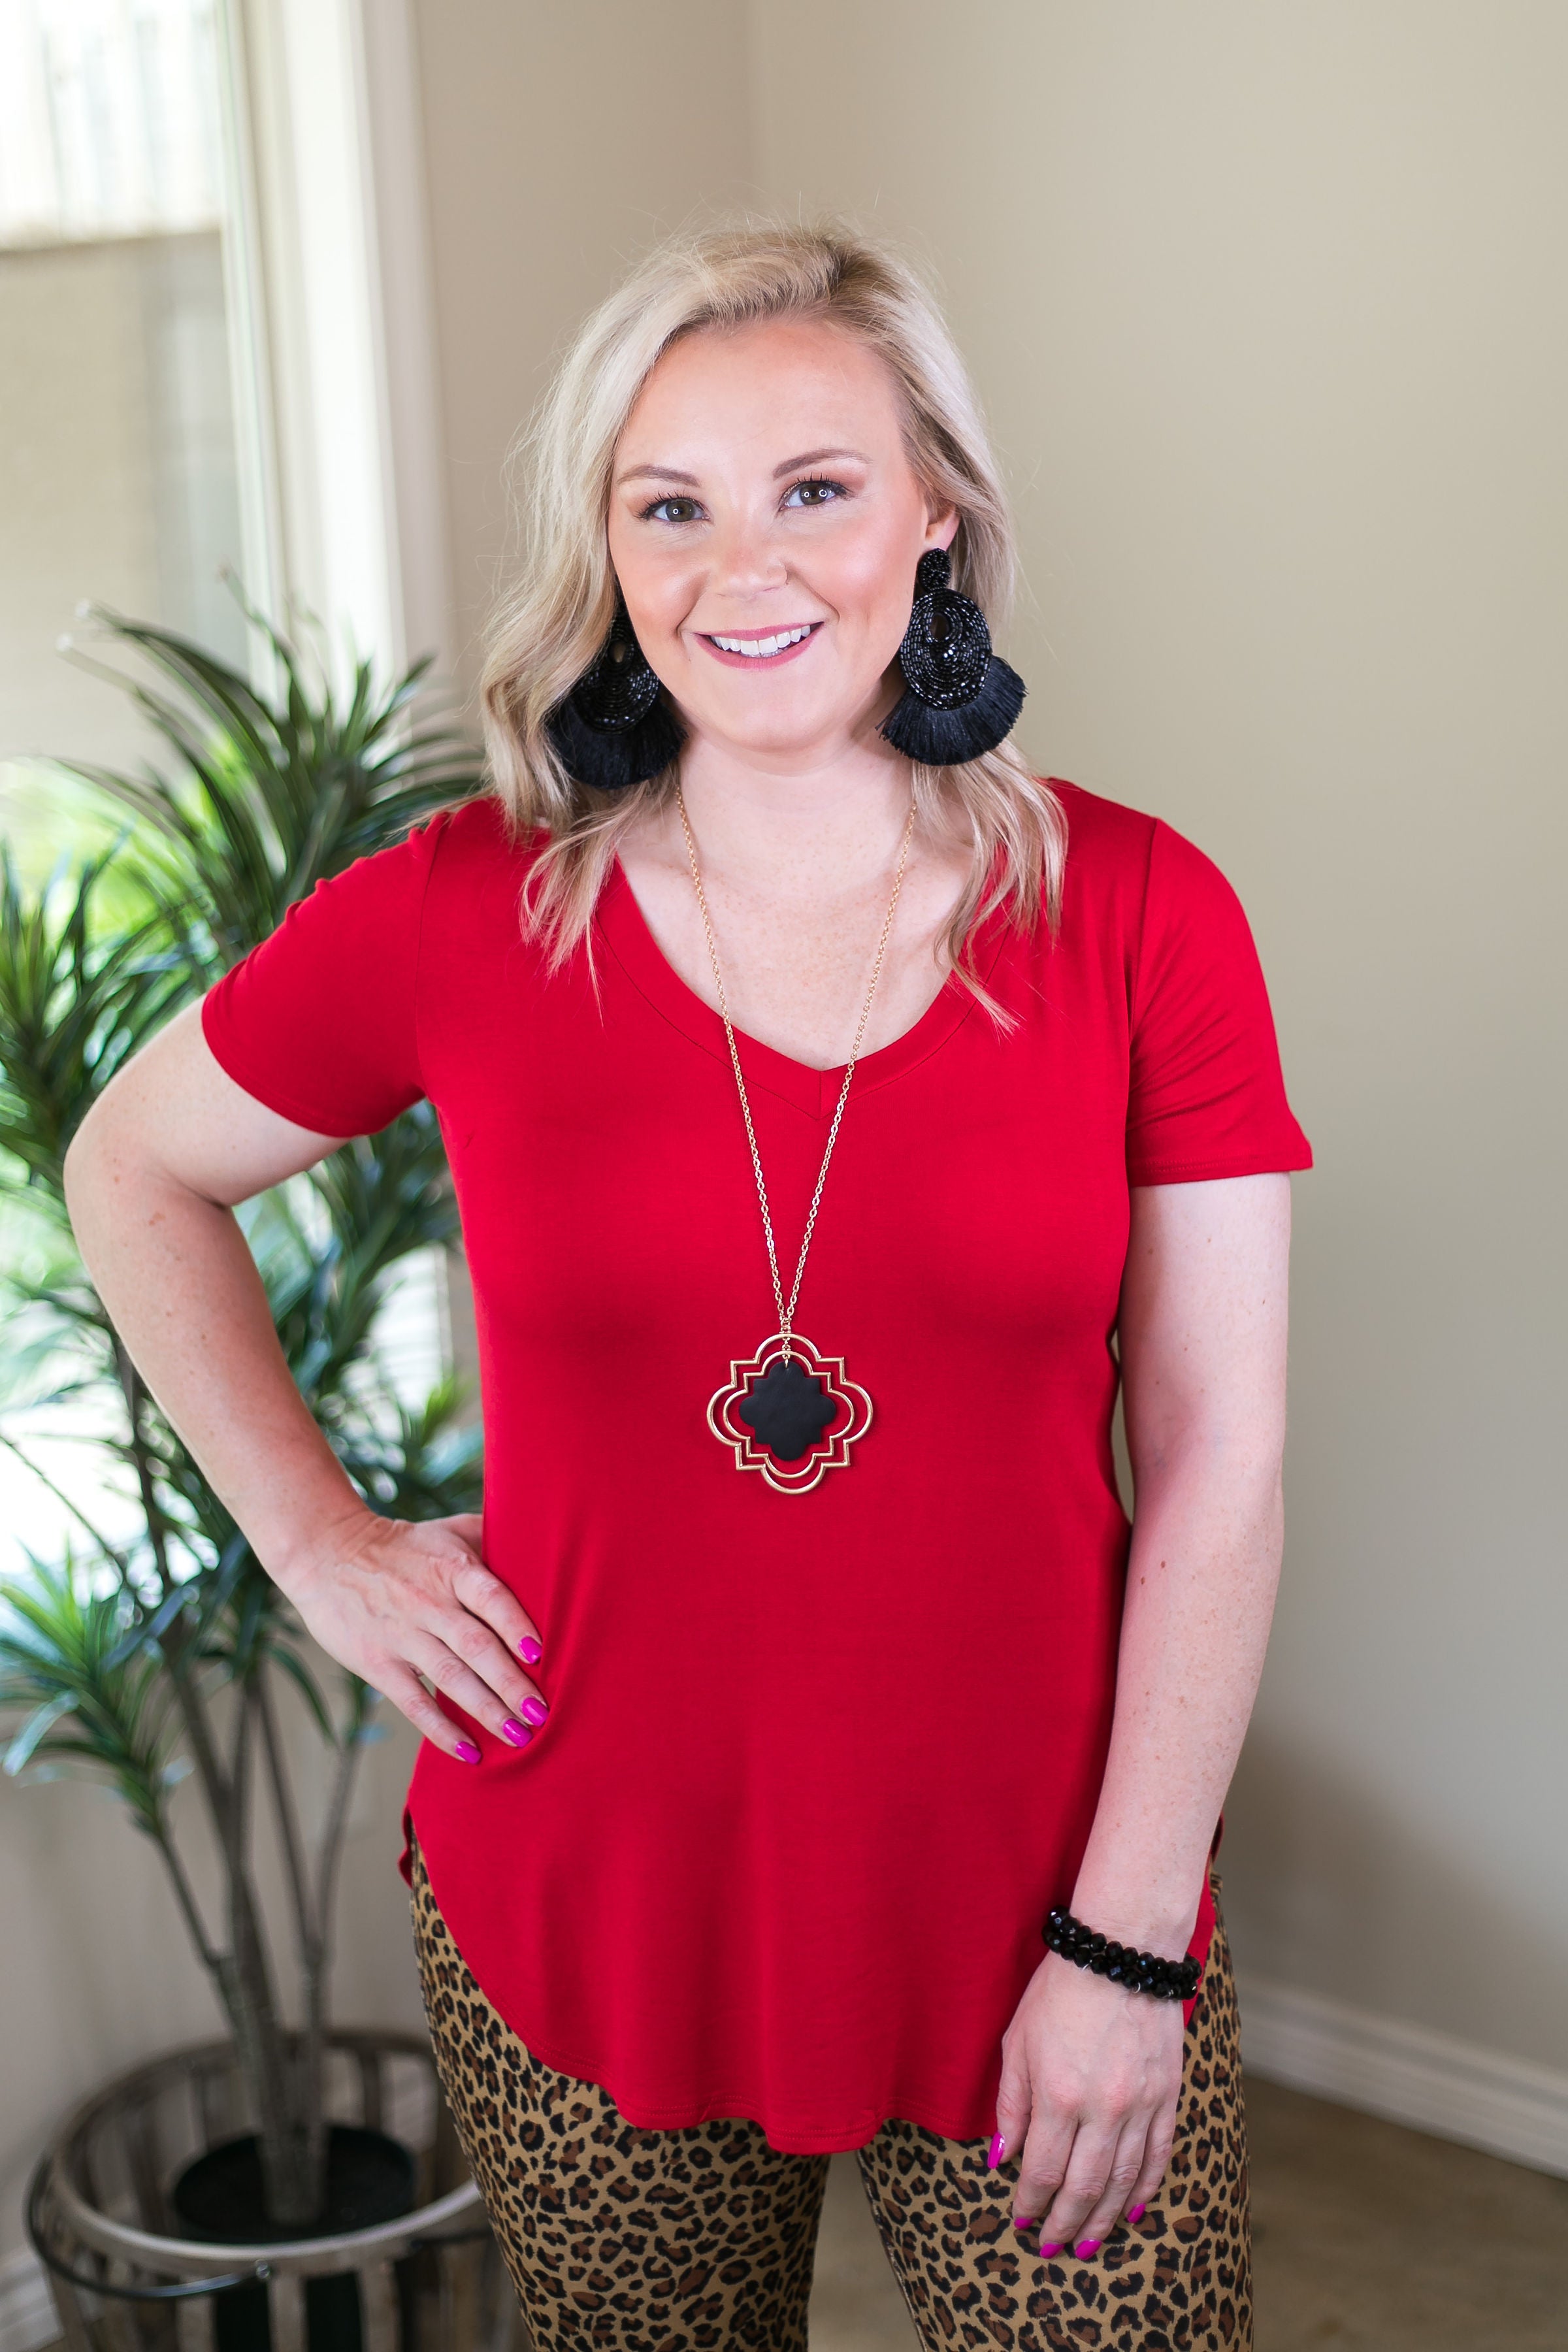 Simply The Best V Neck Short Sleeve Tee Shirt in Red - Giddy Up Glamour Boutique